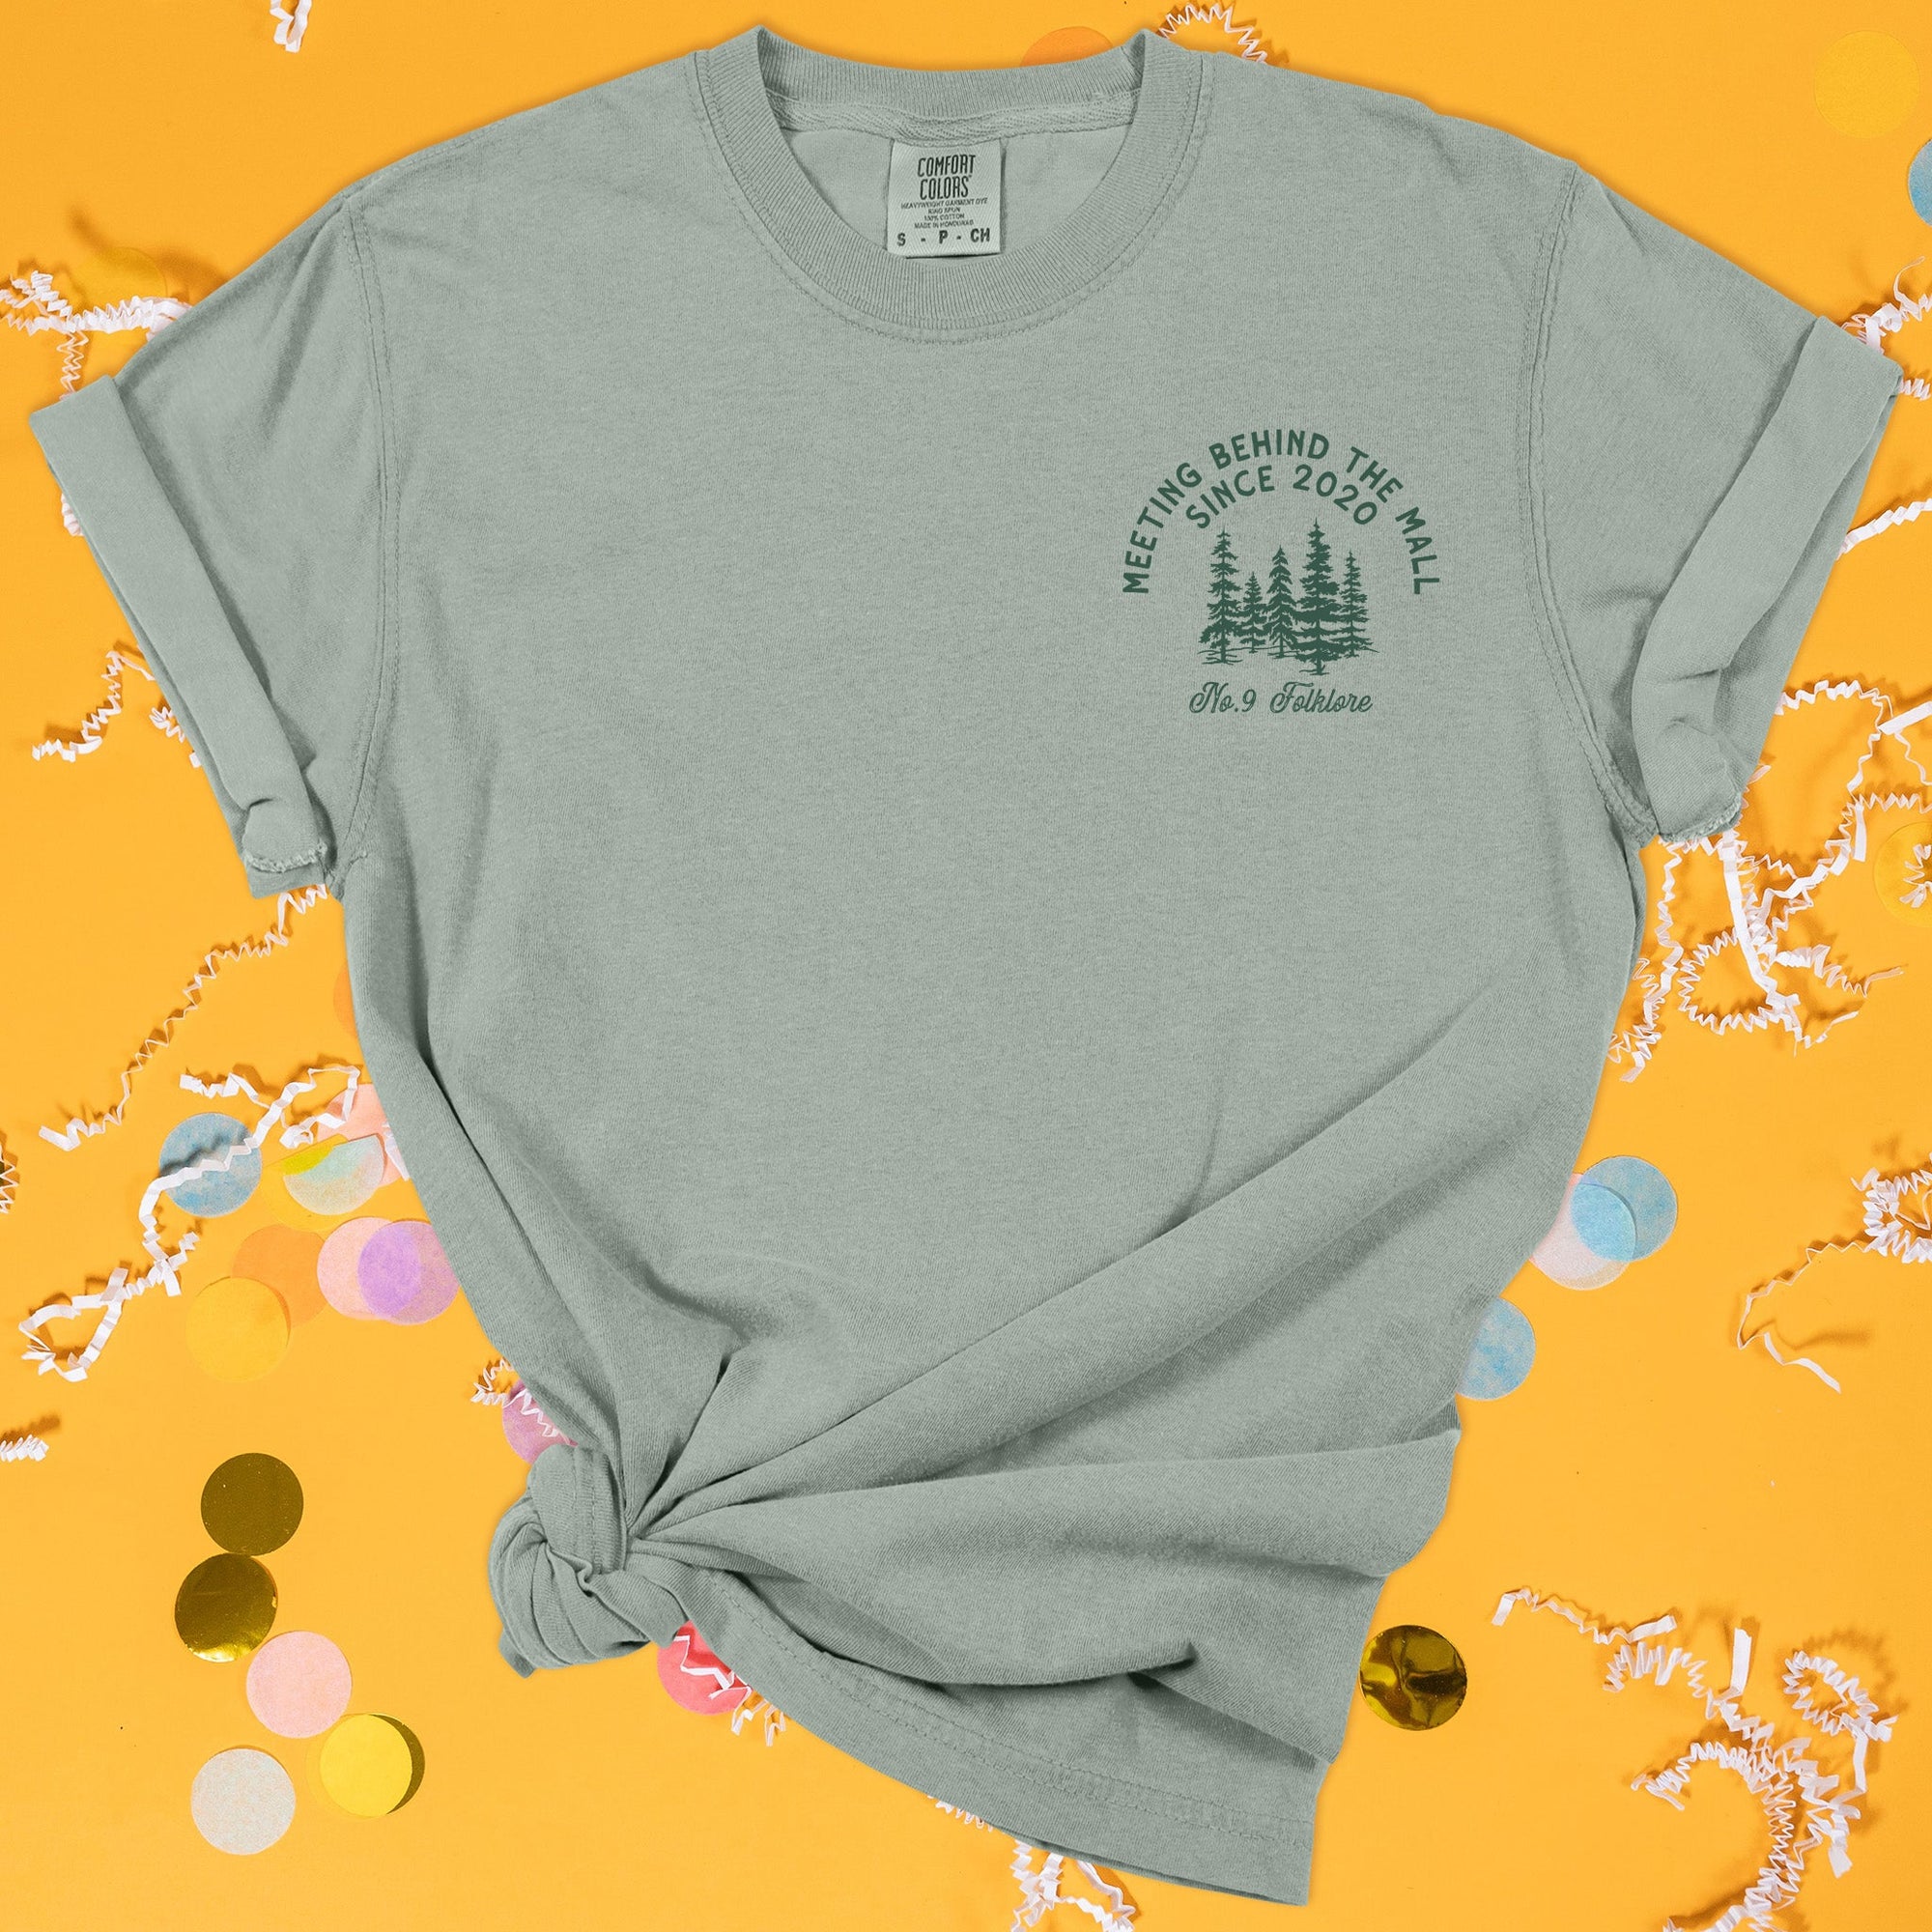 On a sunny mustard background sits the front of a t-shirt with white crinkle and big, colorful confetti scattered around. This Taylor Swift Inspired Reputation tee is dark sage with dark green lettering and an illustration of forest trees over the left chest area. It says "MEETING BEHIND THE MALL SINCE 2020" in all caps and "No.9 Folklore" in script lettering.